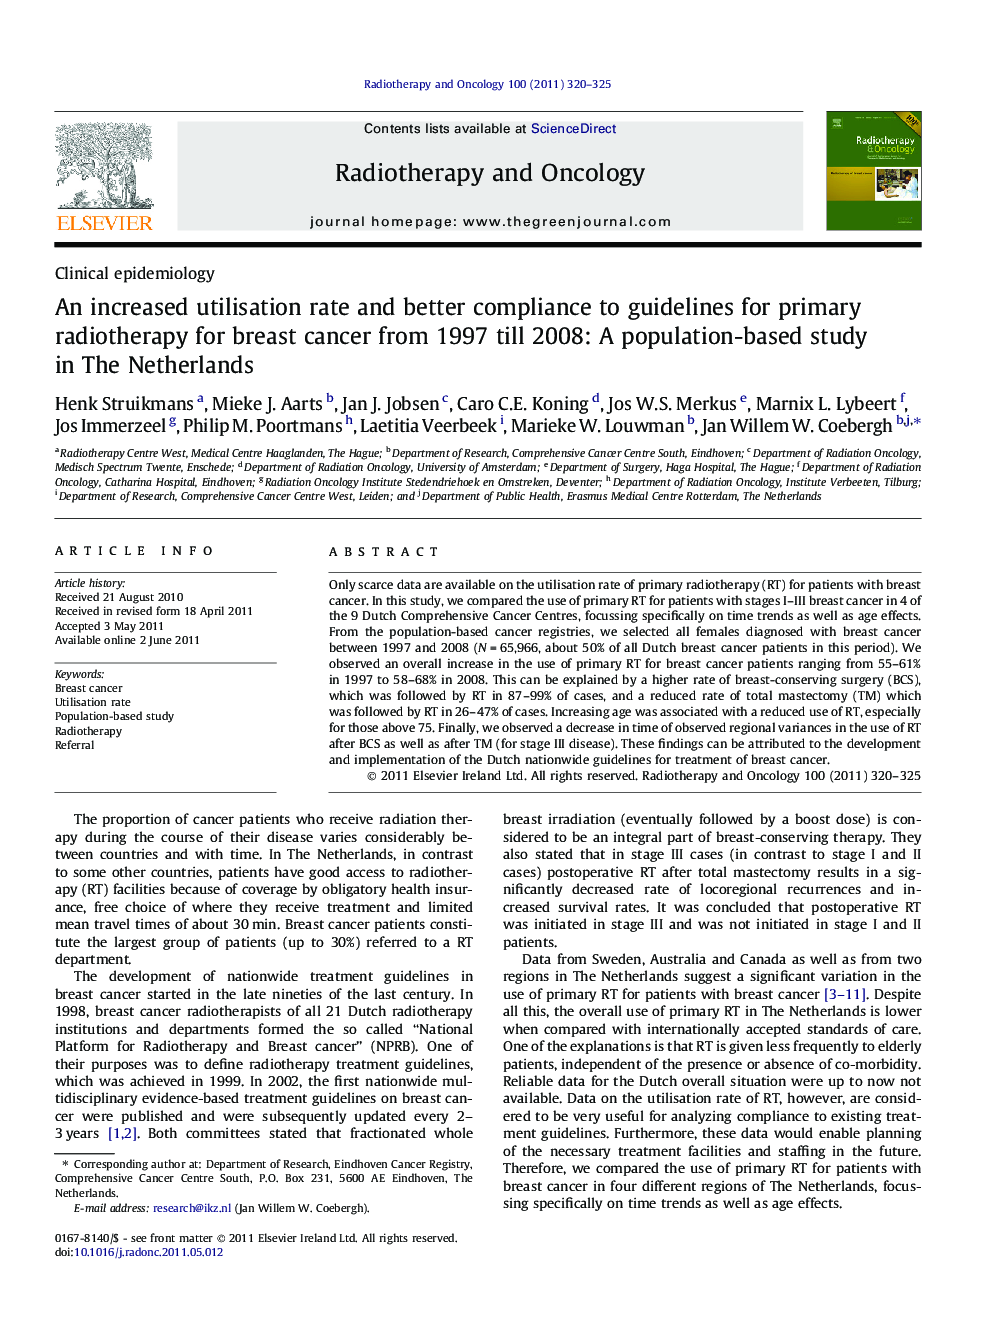 An increased utilisation rate and better compliance to guidelines for primary radiotherapy for breast cancer from 1997 till 2008: A population-based study in The Netherlands